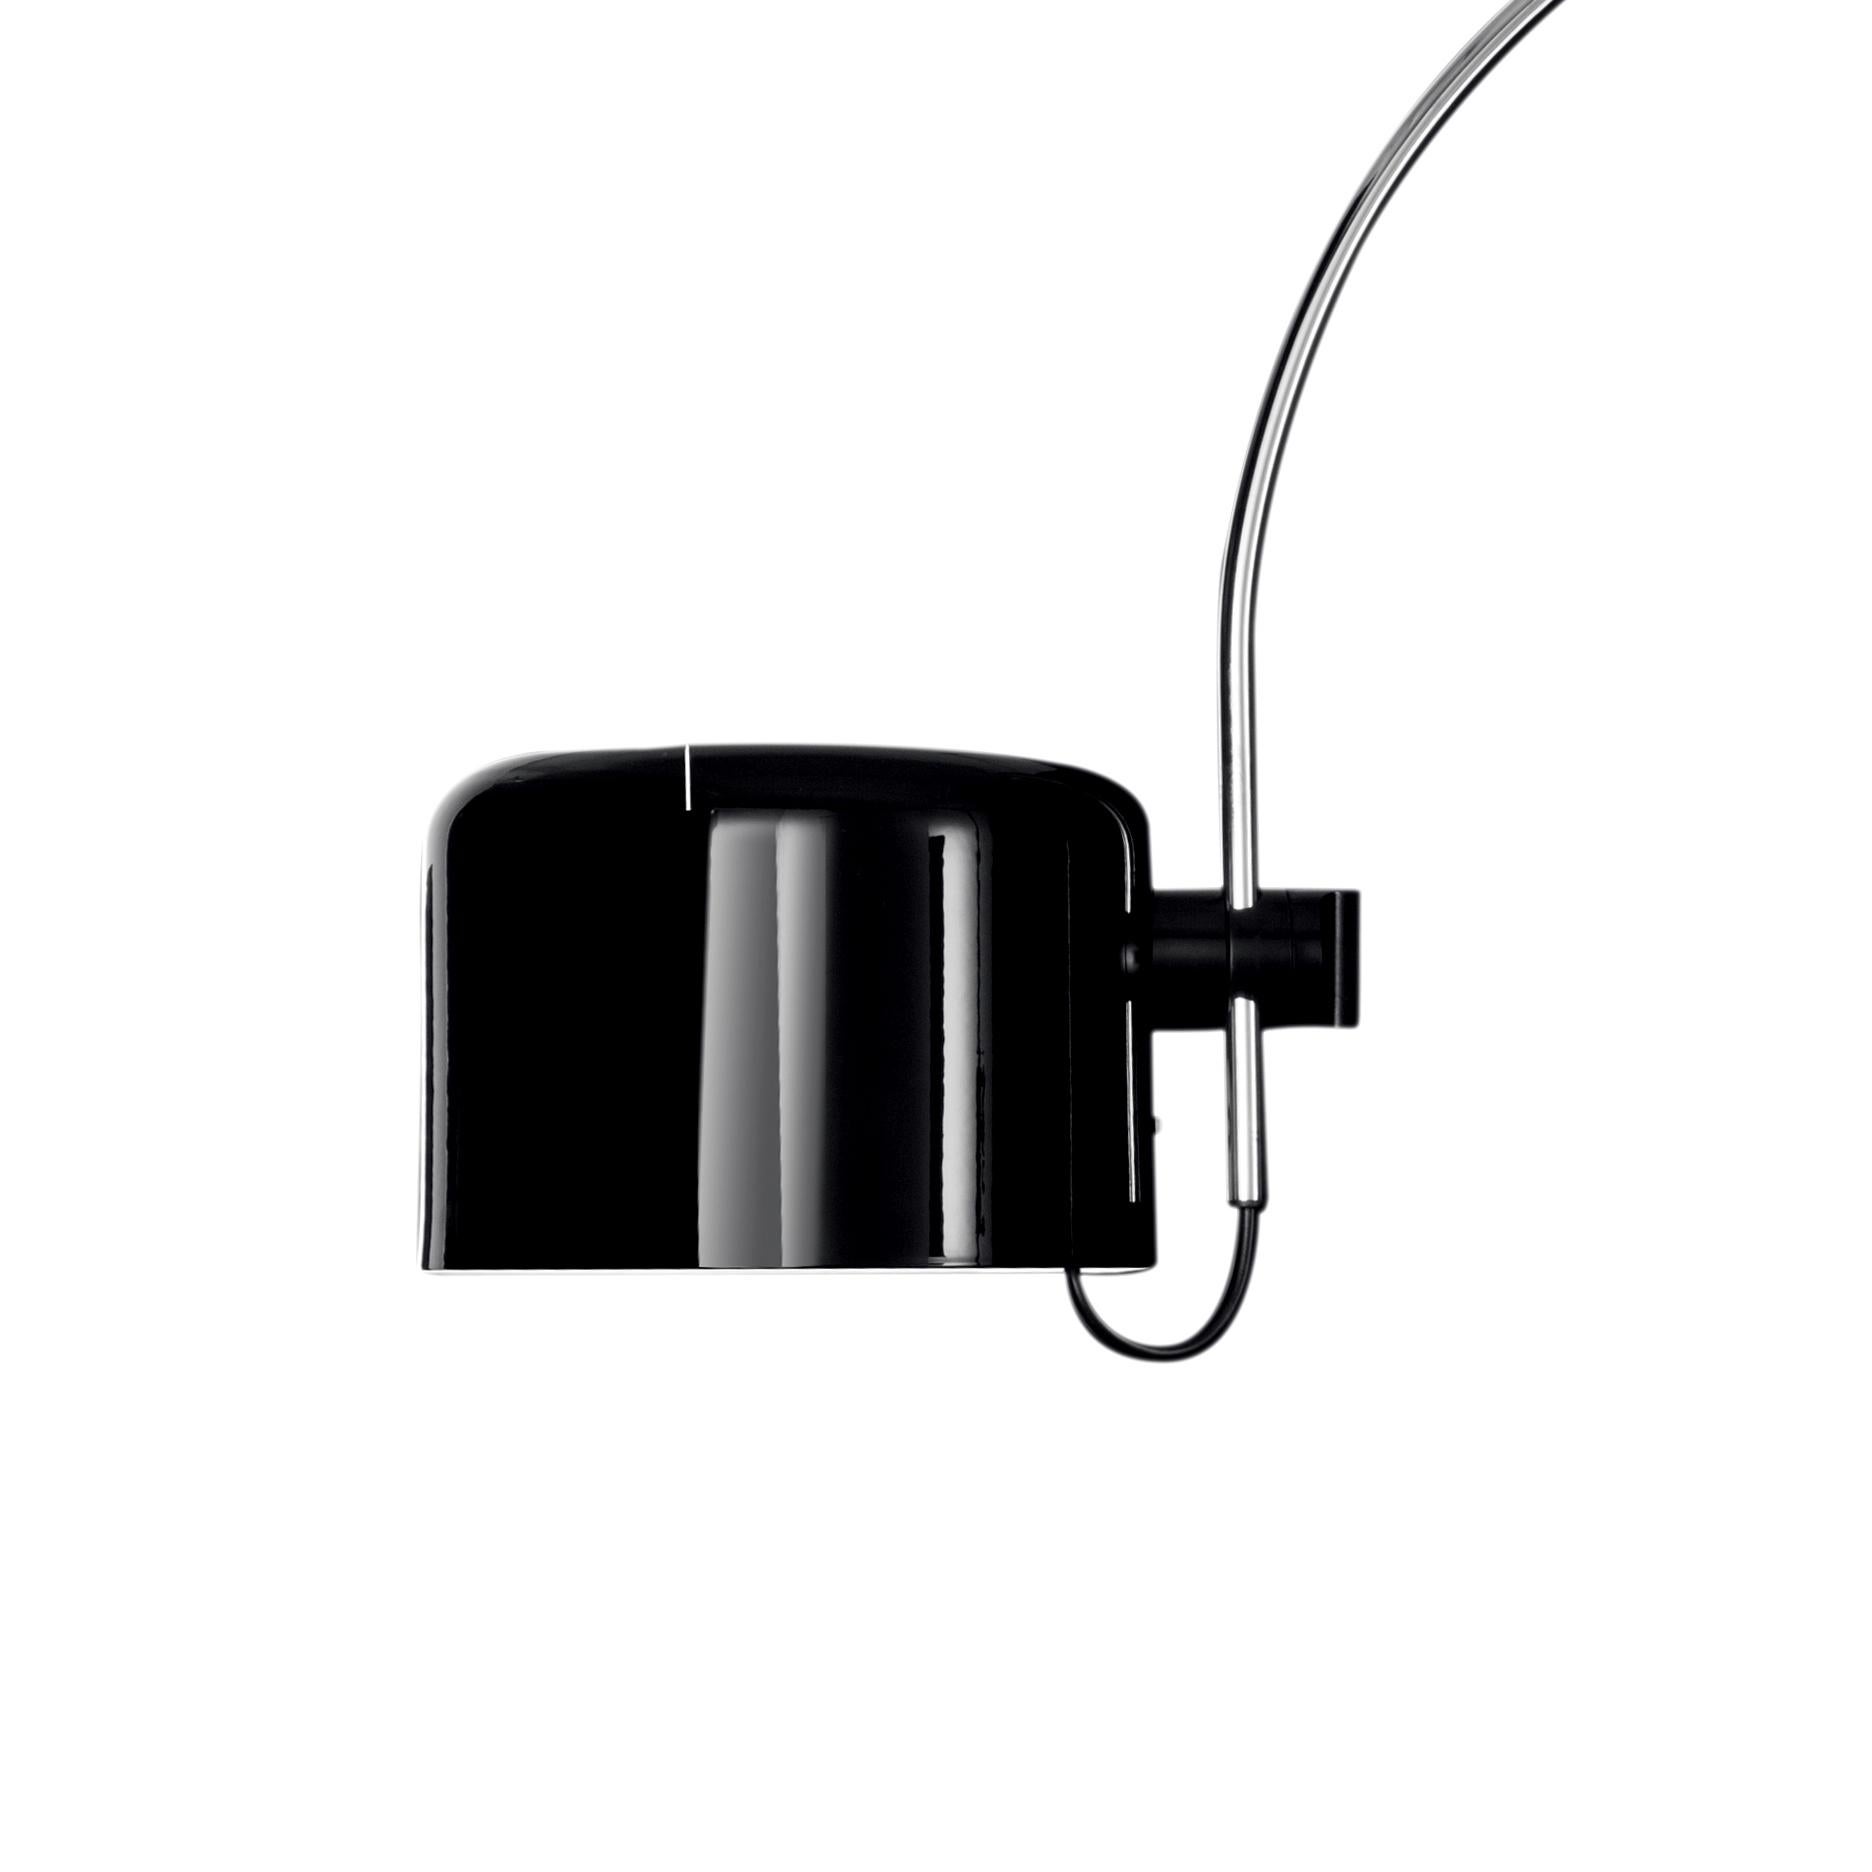 Wall lamp 'Coupé' designed by Joe Colombo in 1967.
Adjustable rotating metal wall lamp giving direct and reflected light. 
Manufactured by Oluce, Italy.

The Coupé series, designed by Joe Colombo, was initially conceived as a variation of the